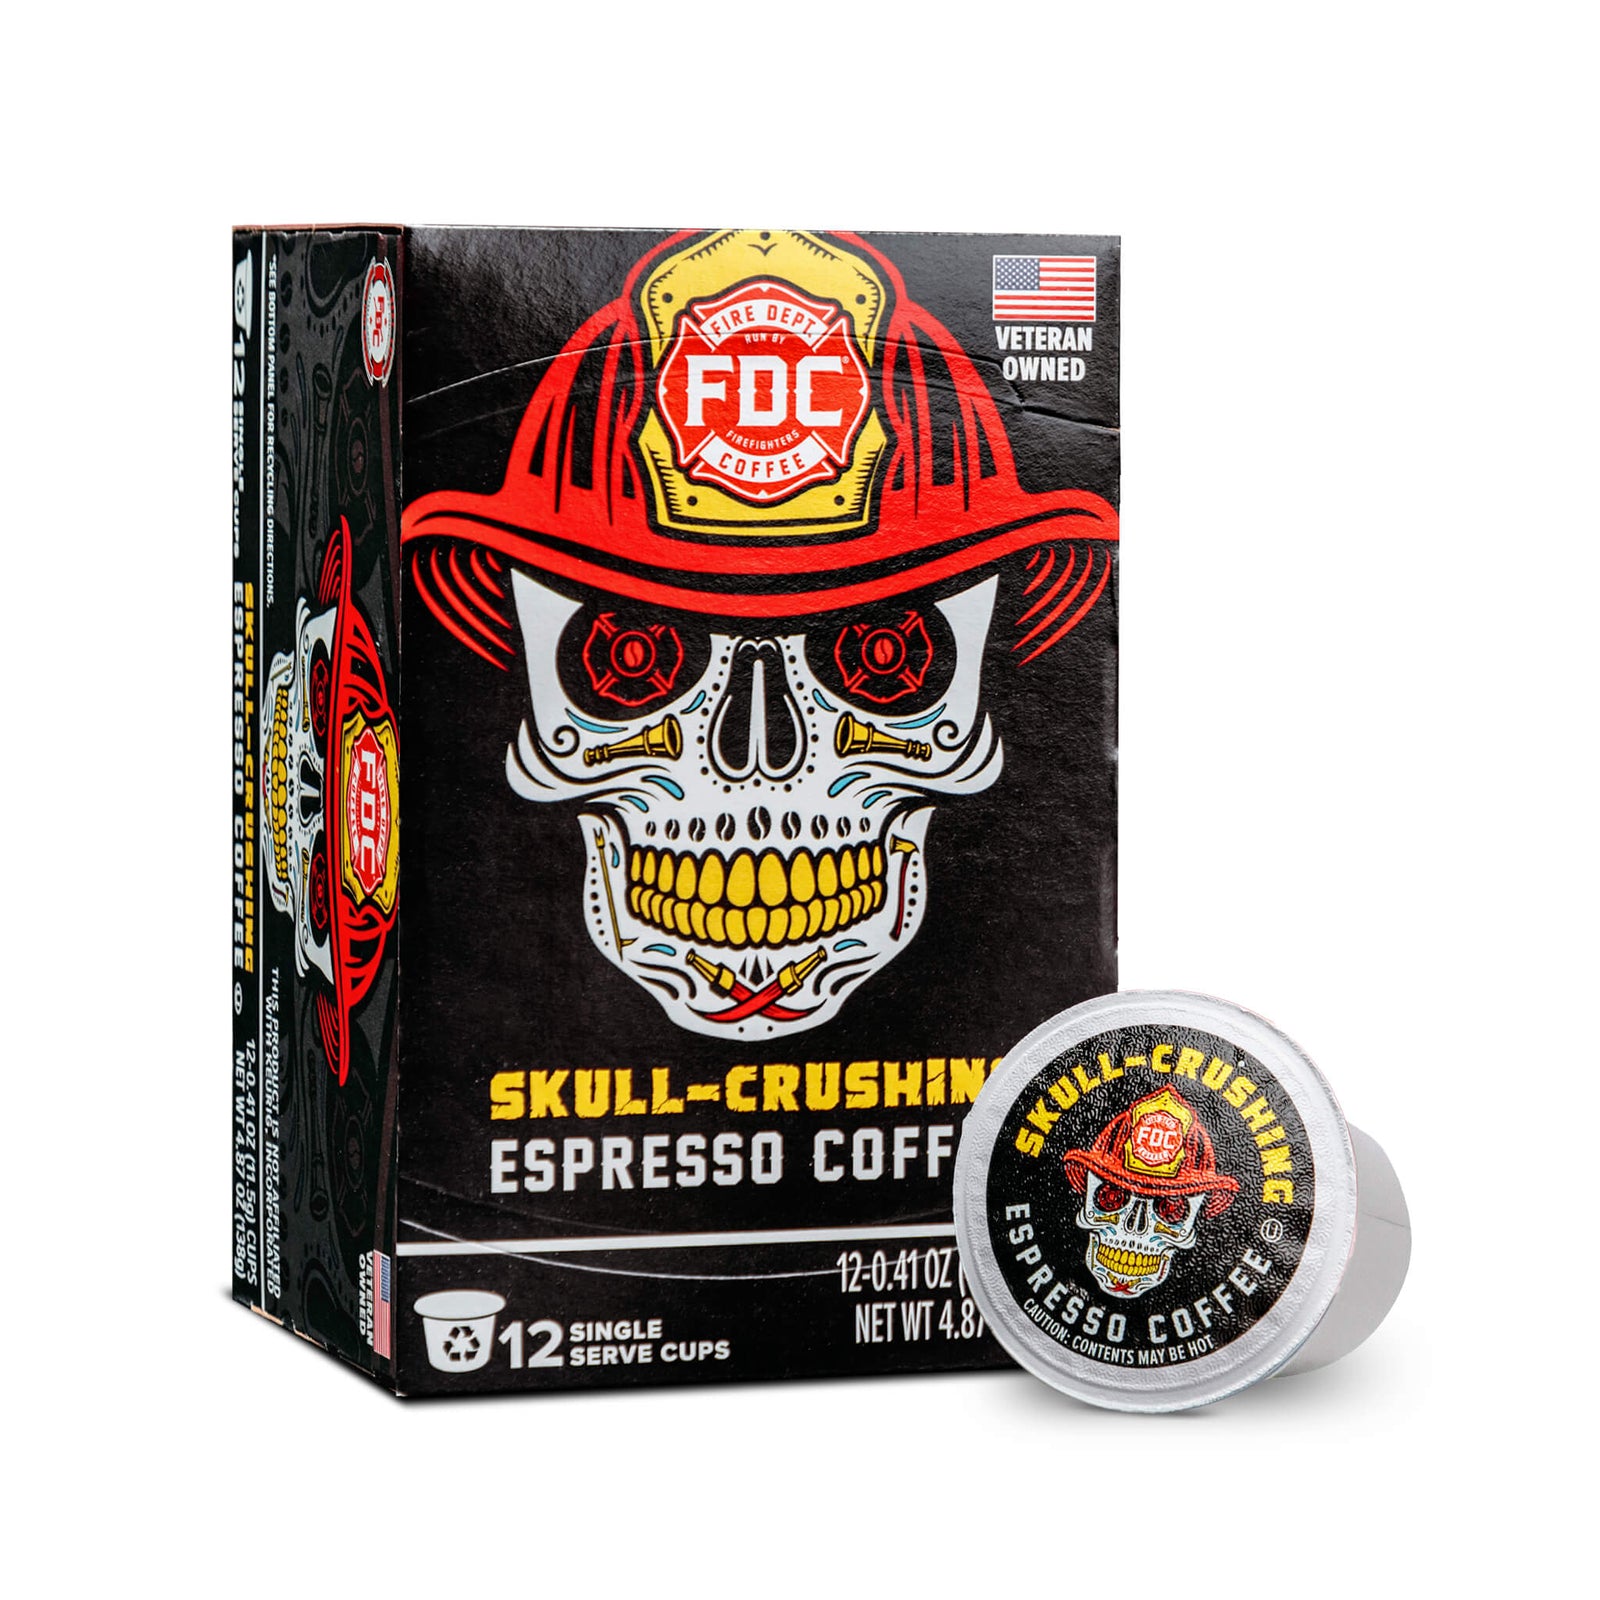 An image of the front of a box of Skull-Crushing Espresso Coffee Pods.